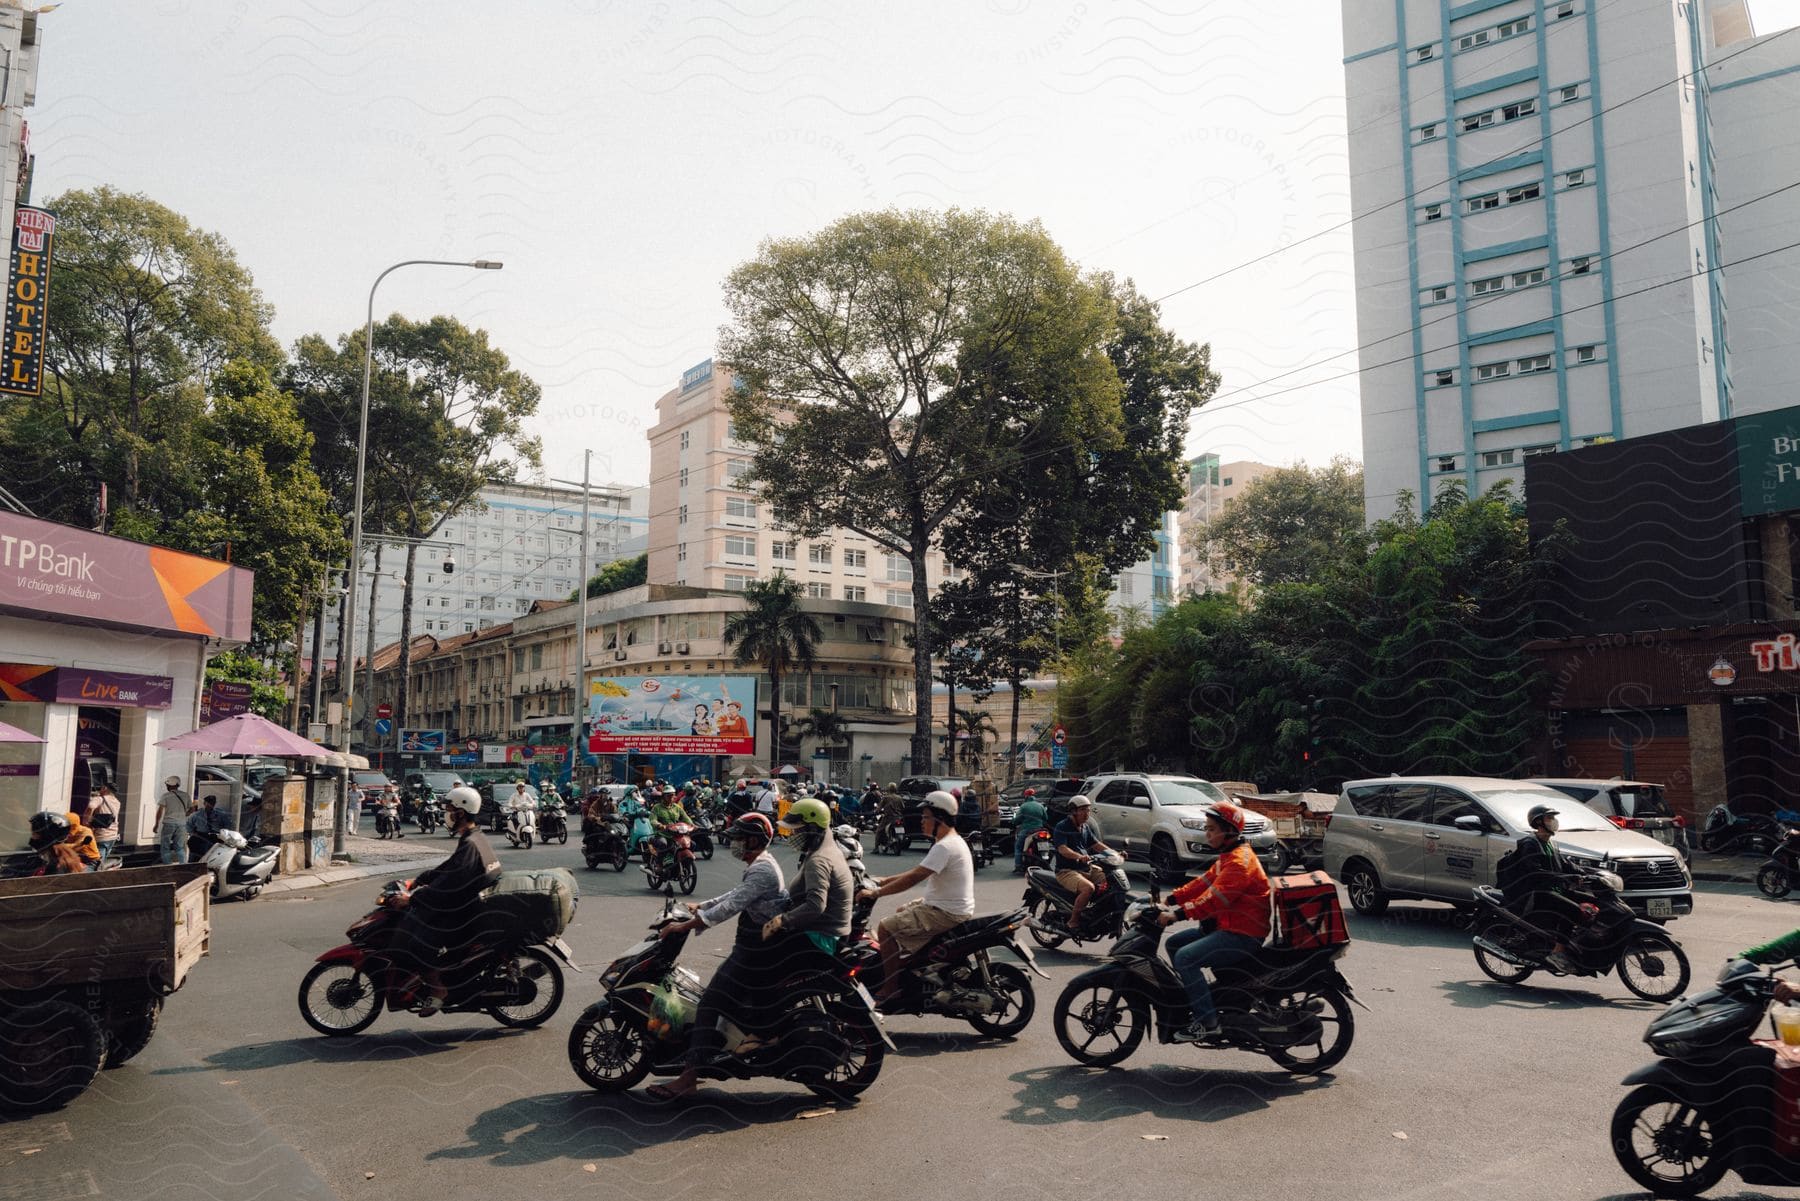 Intense city traffic, with a majority of motorcycles.